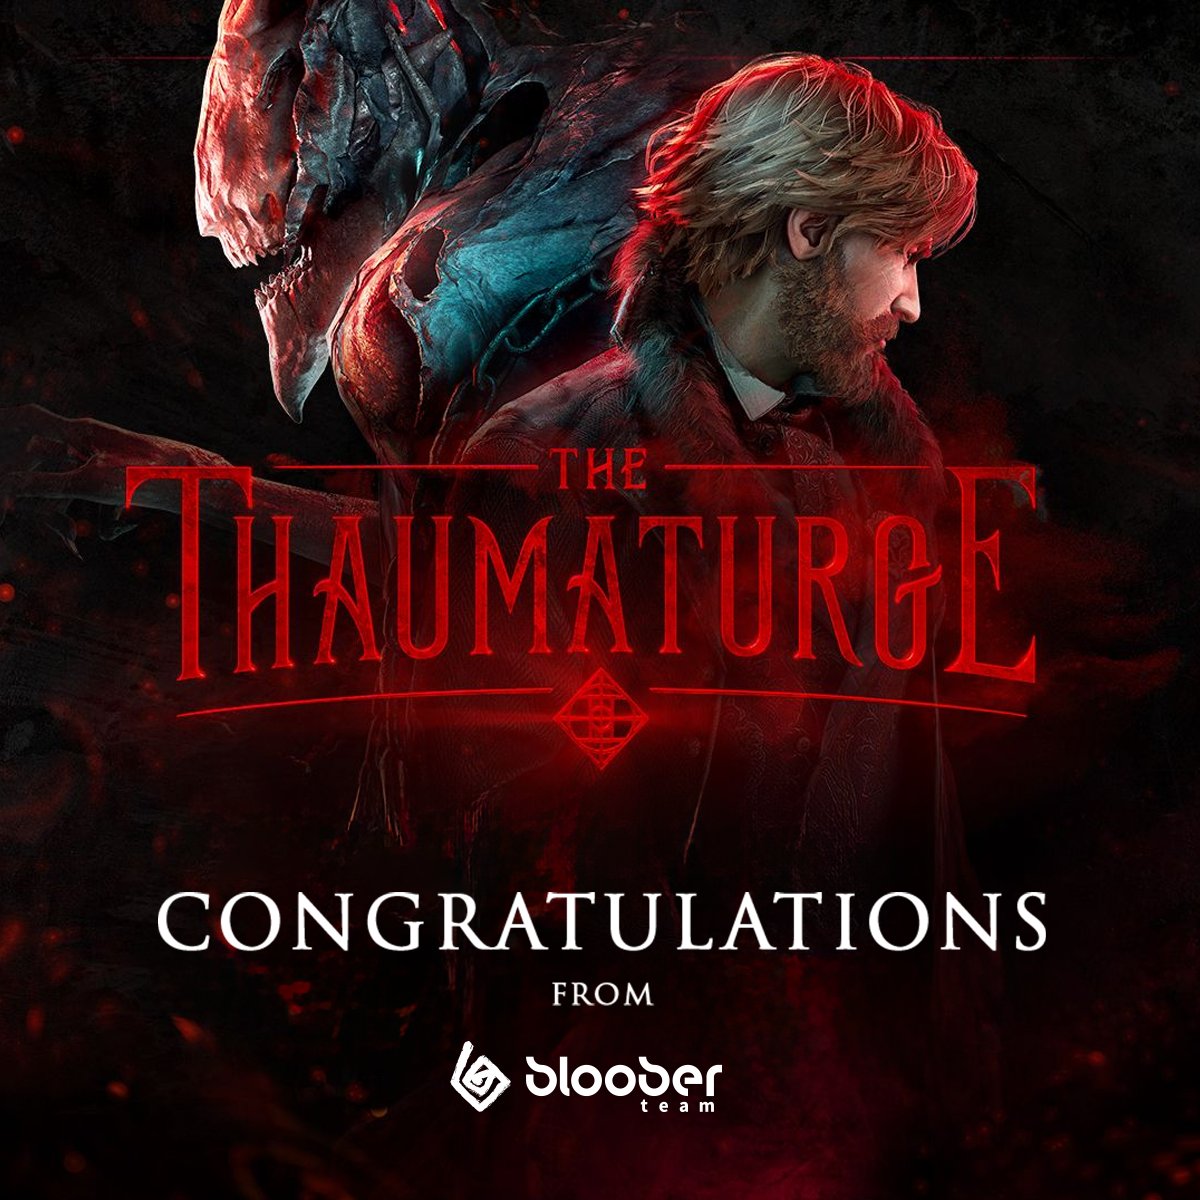 Congrats to our friends at @Fools_Theory and @11bitstudios for the fantastic launch of @thaumaturgegame! We are impressed by the amazing way in which you captured the atmosphere of early 20th century Warsaw in your game. Can’t wait to play it!